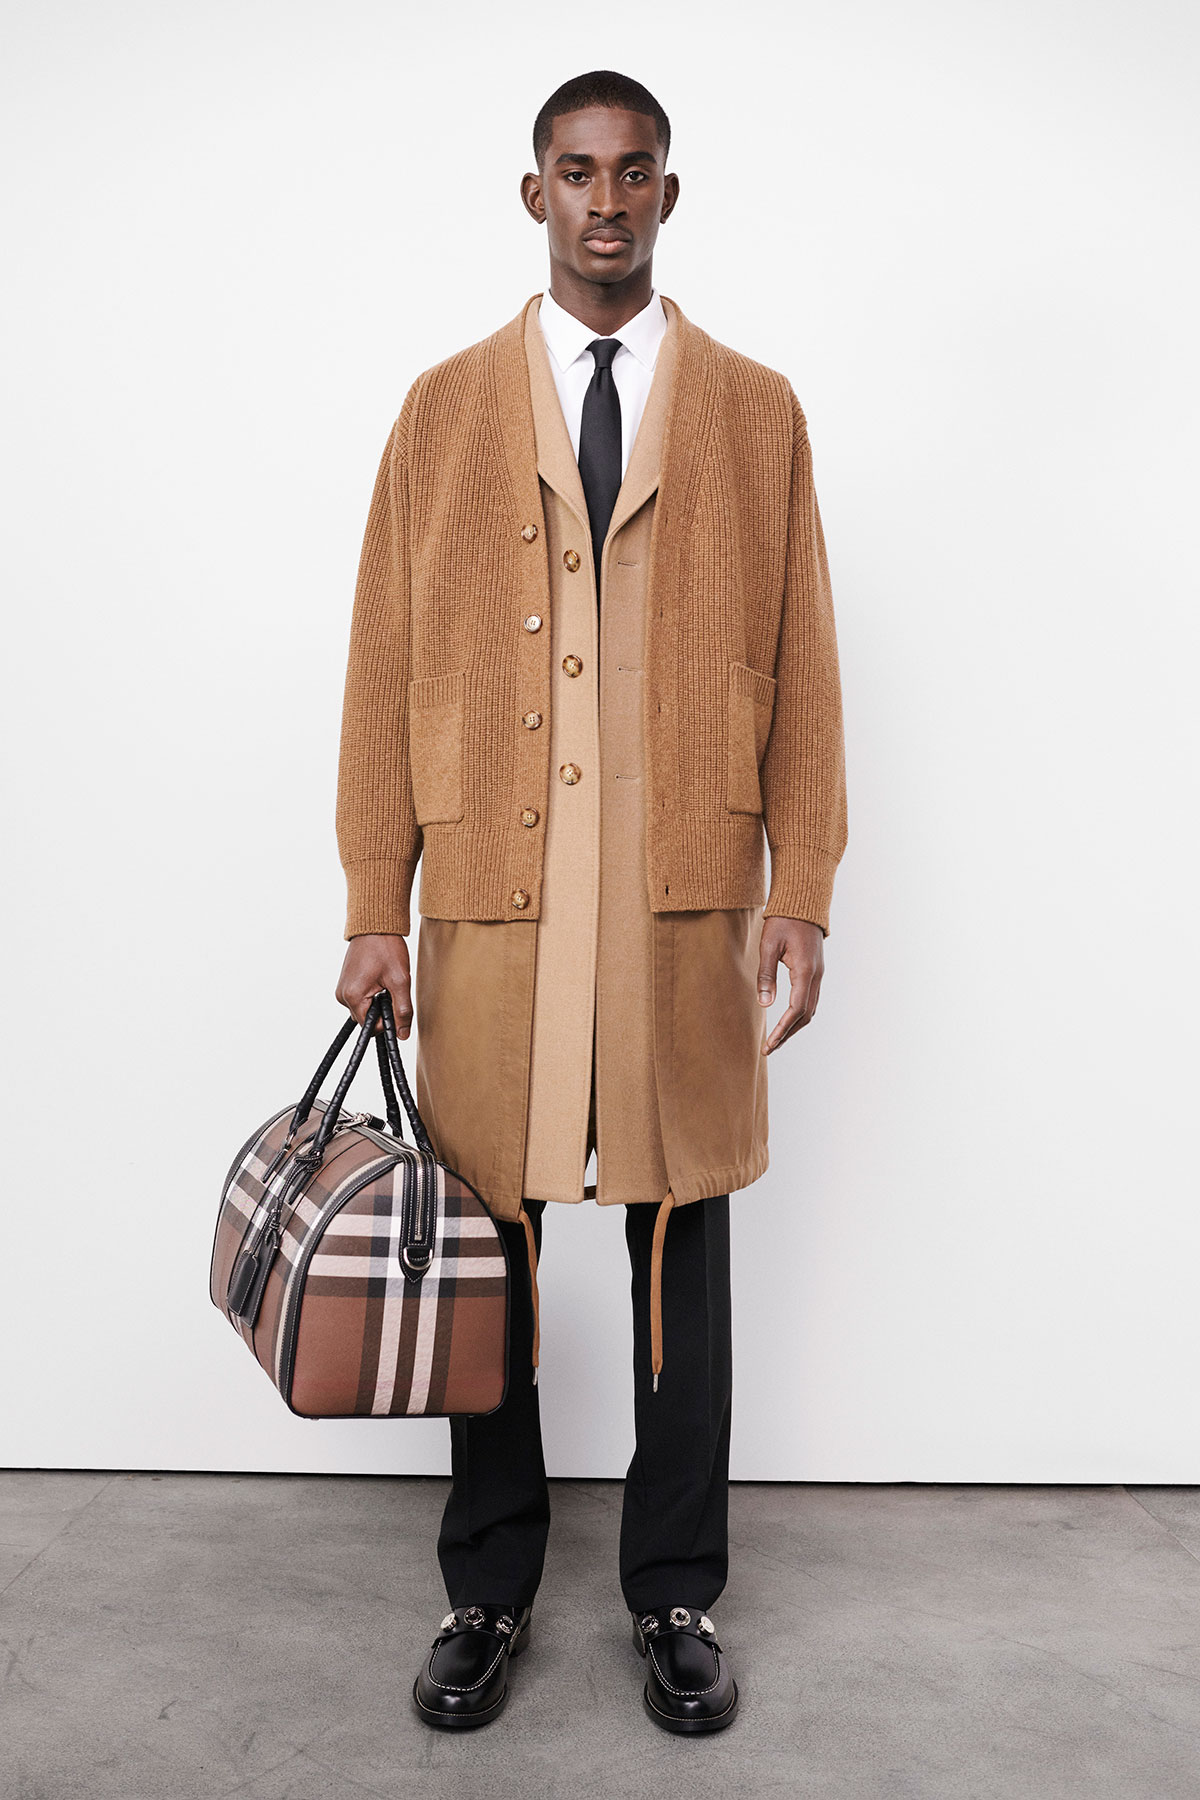 First Look At Burberry's Autumn/Winter Collection For 2022